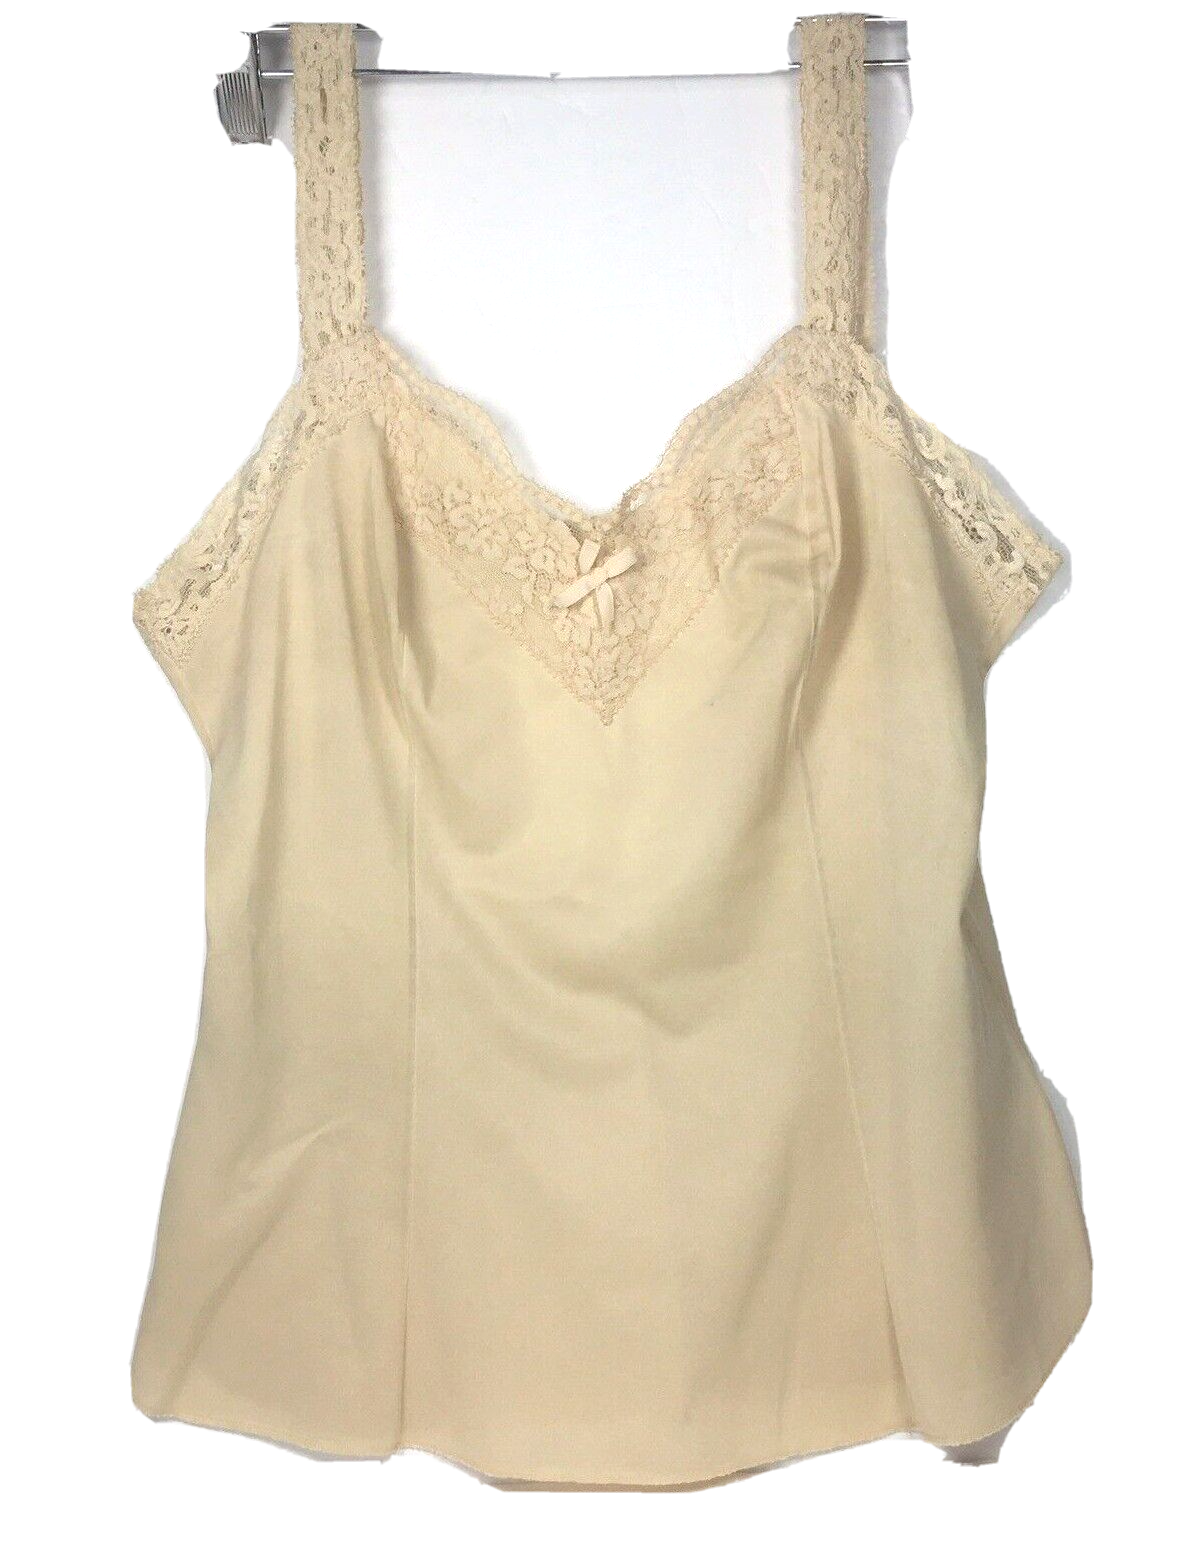 Primary image for Vintage Olga Camisole Nylon Lace Straps Trim Top Size M Style 925 Made in USA